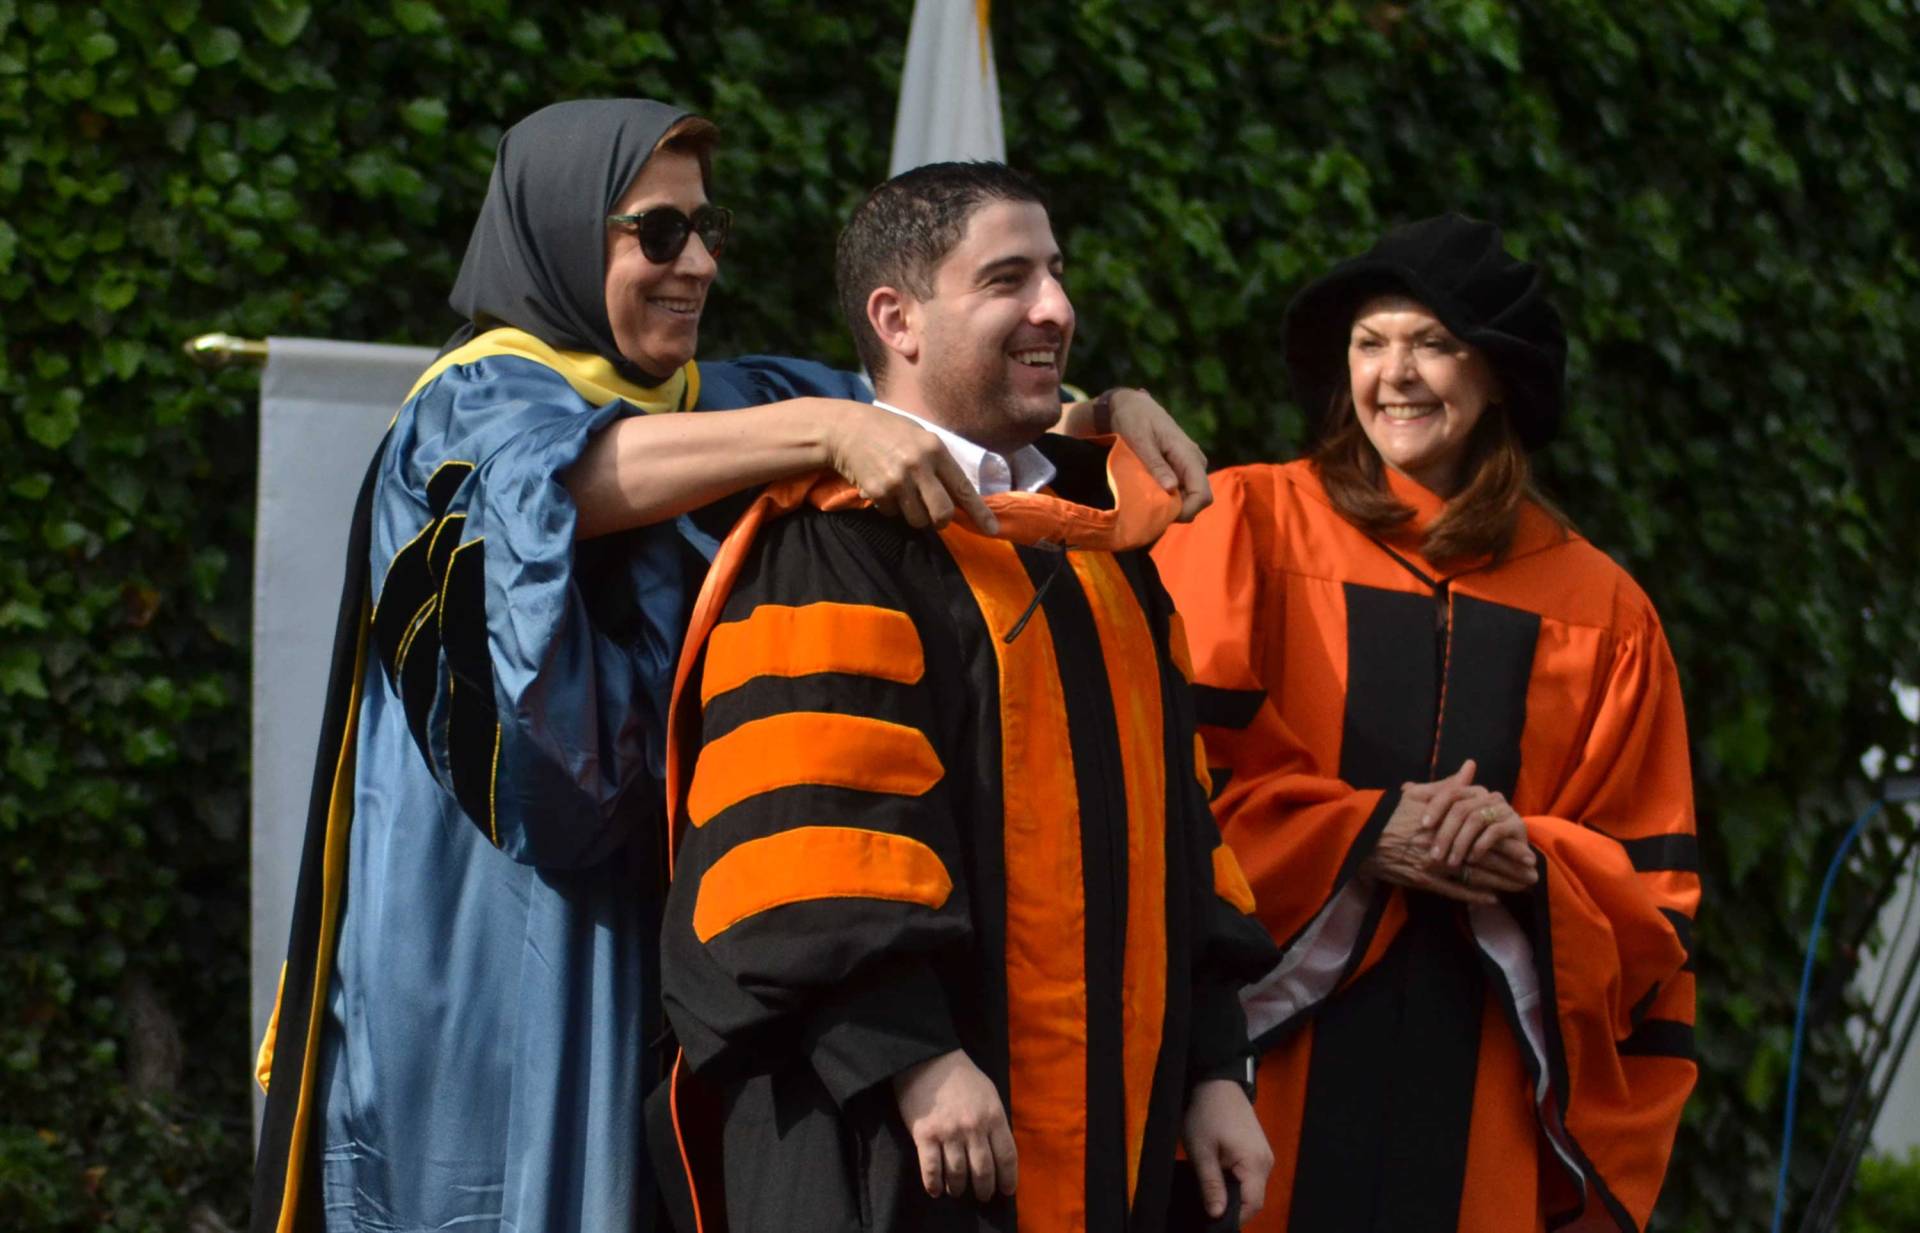 A student is hooded by Amaney Jamal, his advisor